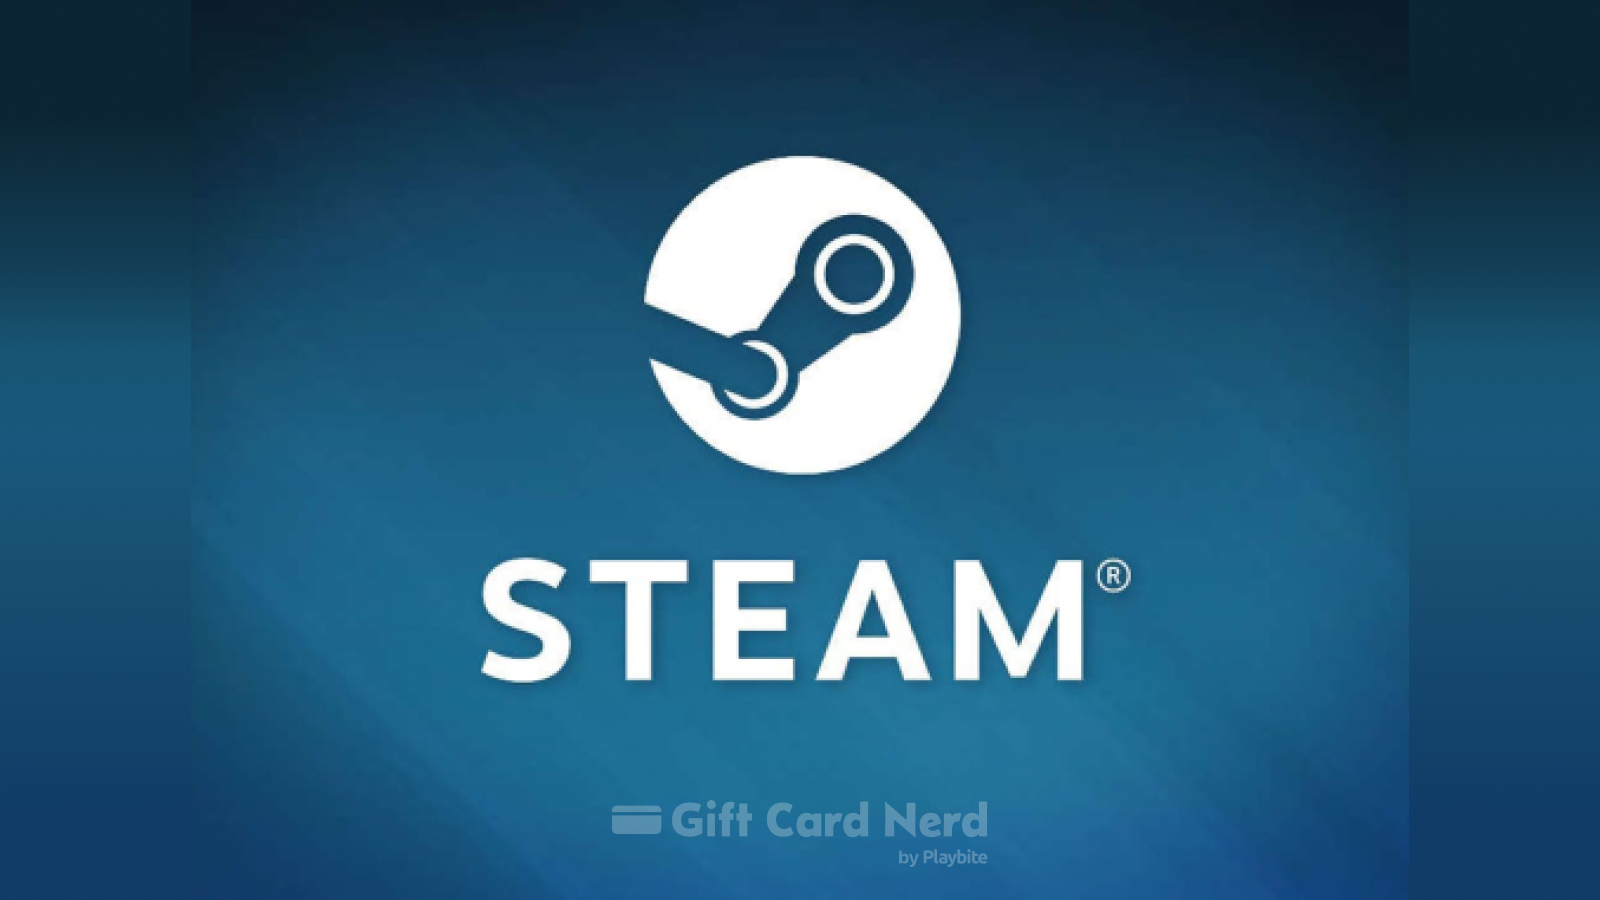 Can I Use a Steam Gift Card on Apple Wallet?